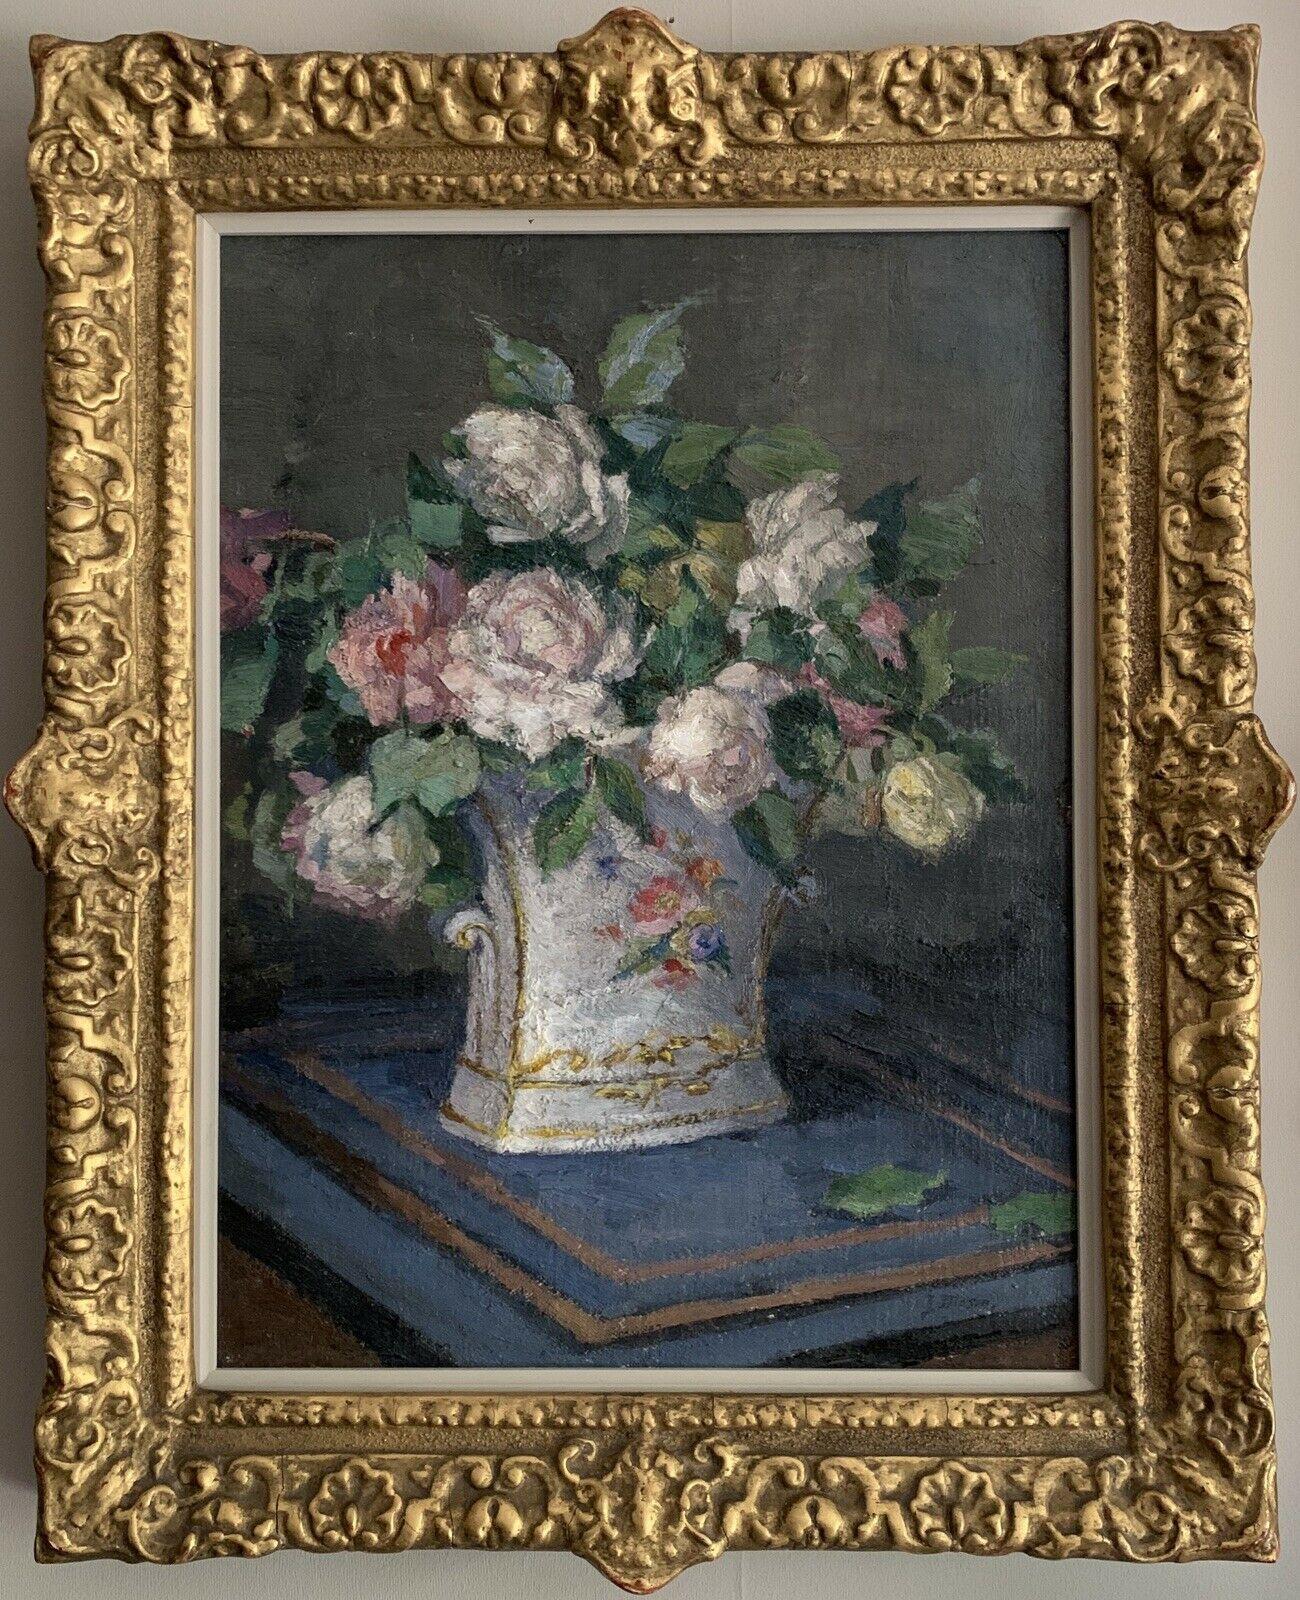 EARLY 1900'S ENGLISH IMPRESSIONIST SIGNED OIL - STILL LIFE ROSES IN ORNATE VASE